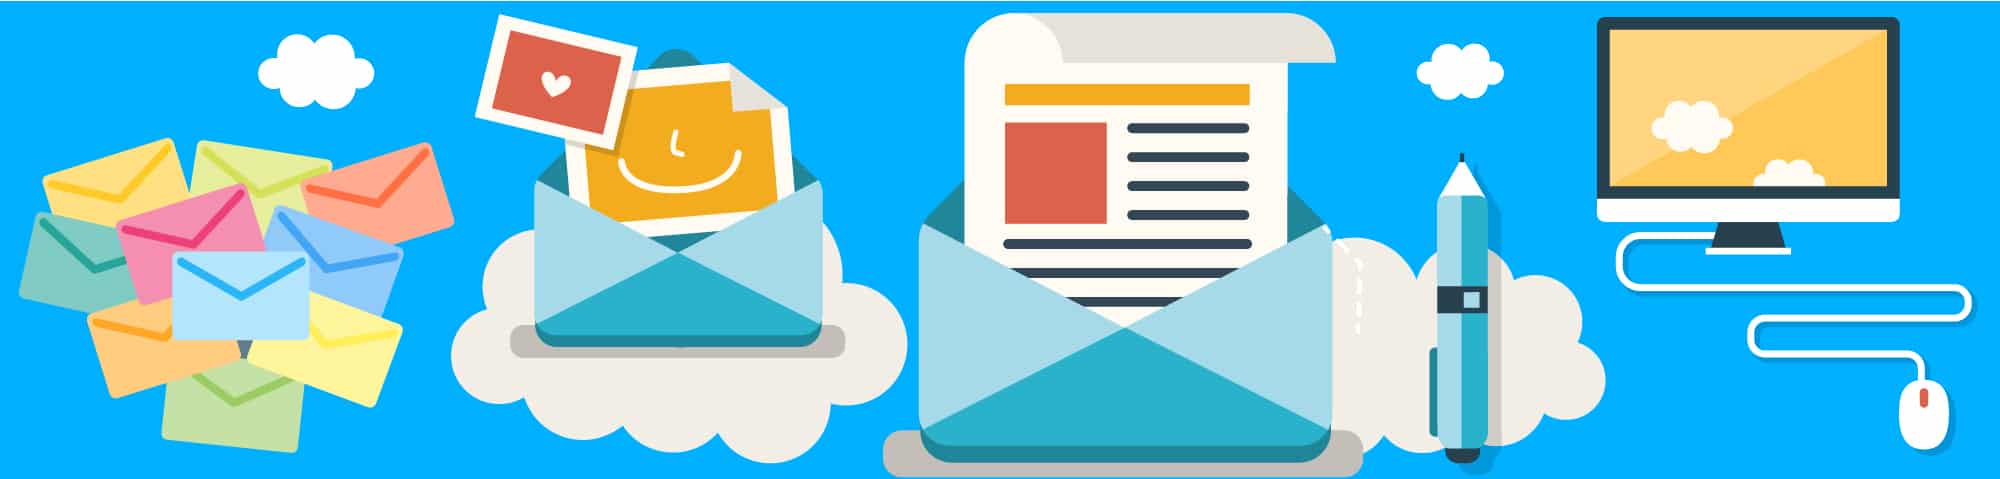 These Email Marketing Trends Will Grow Your Business In 2021